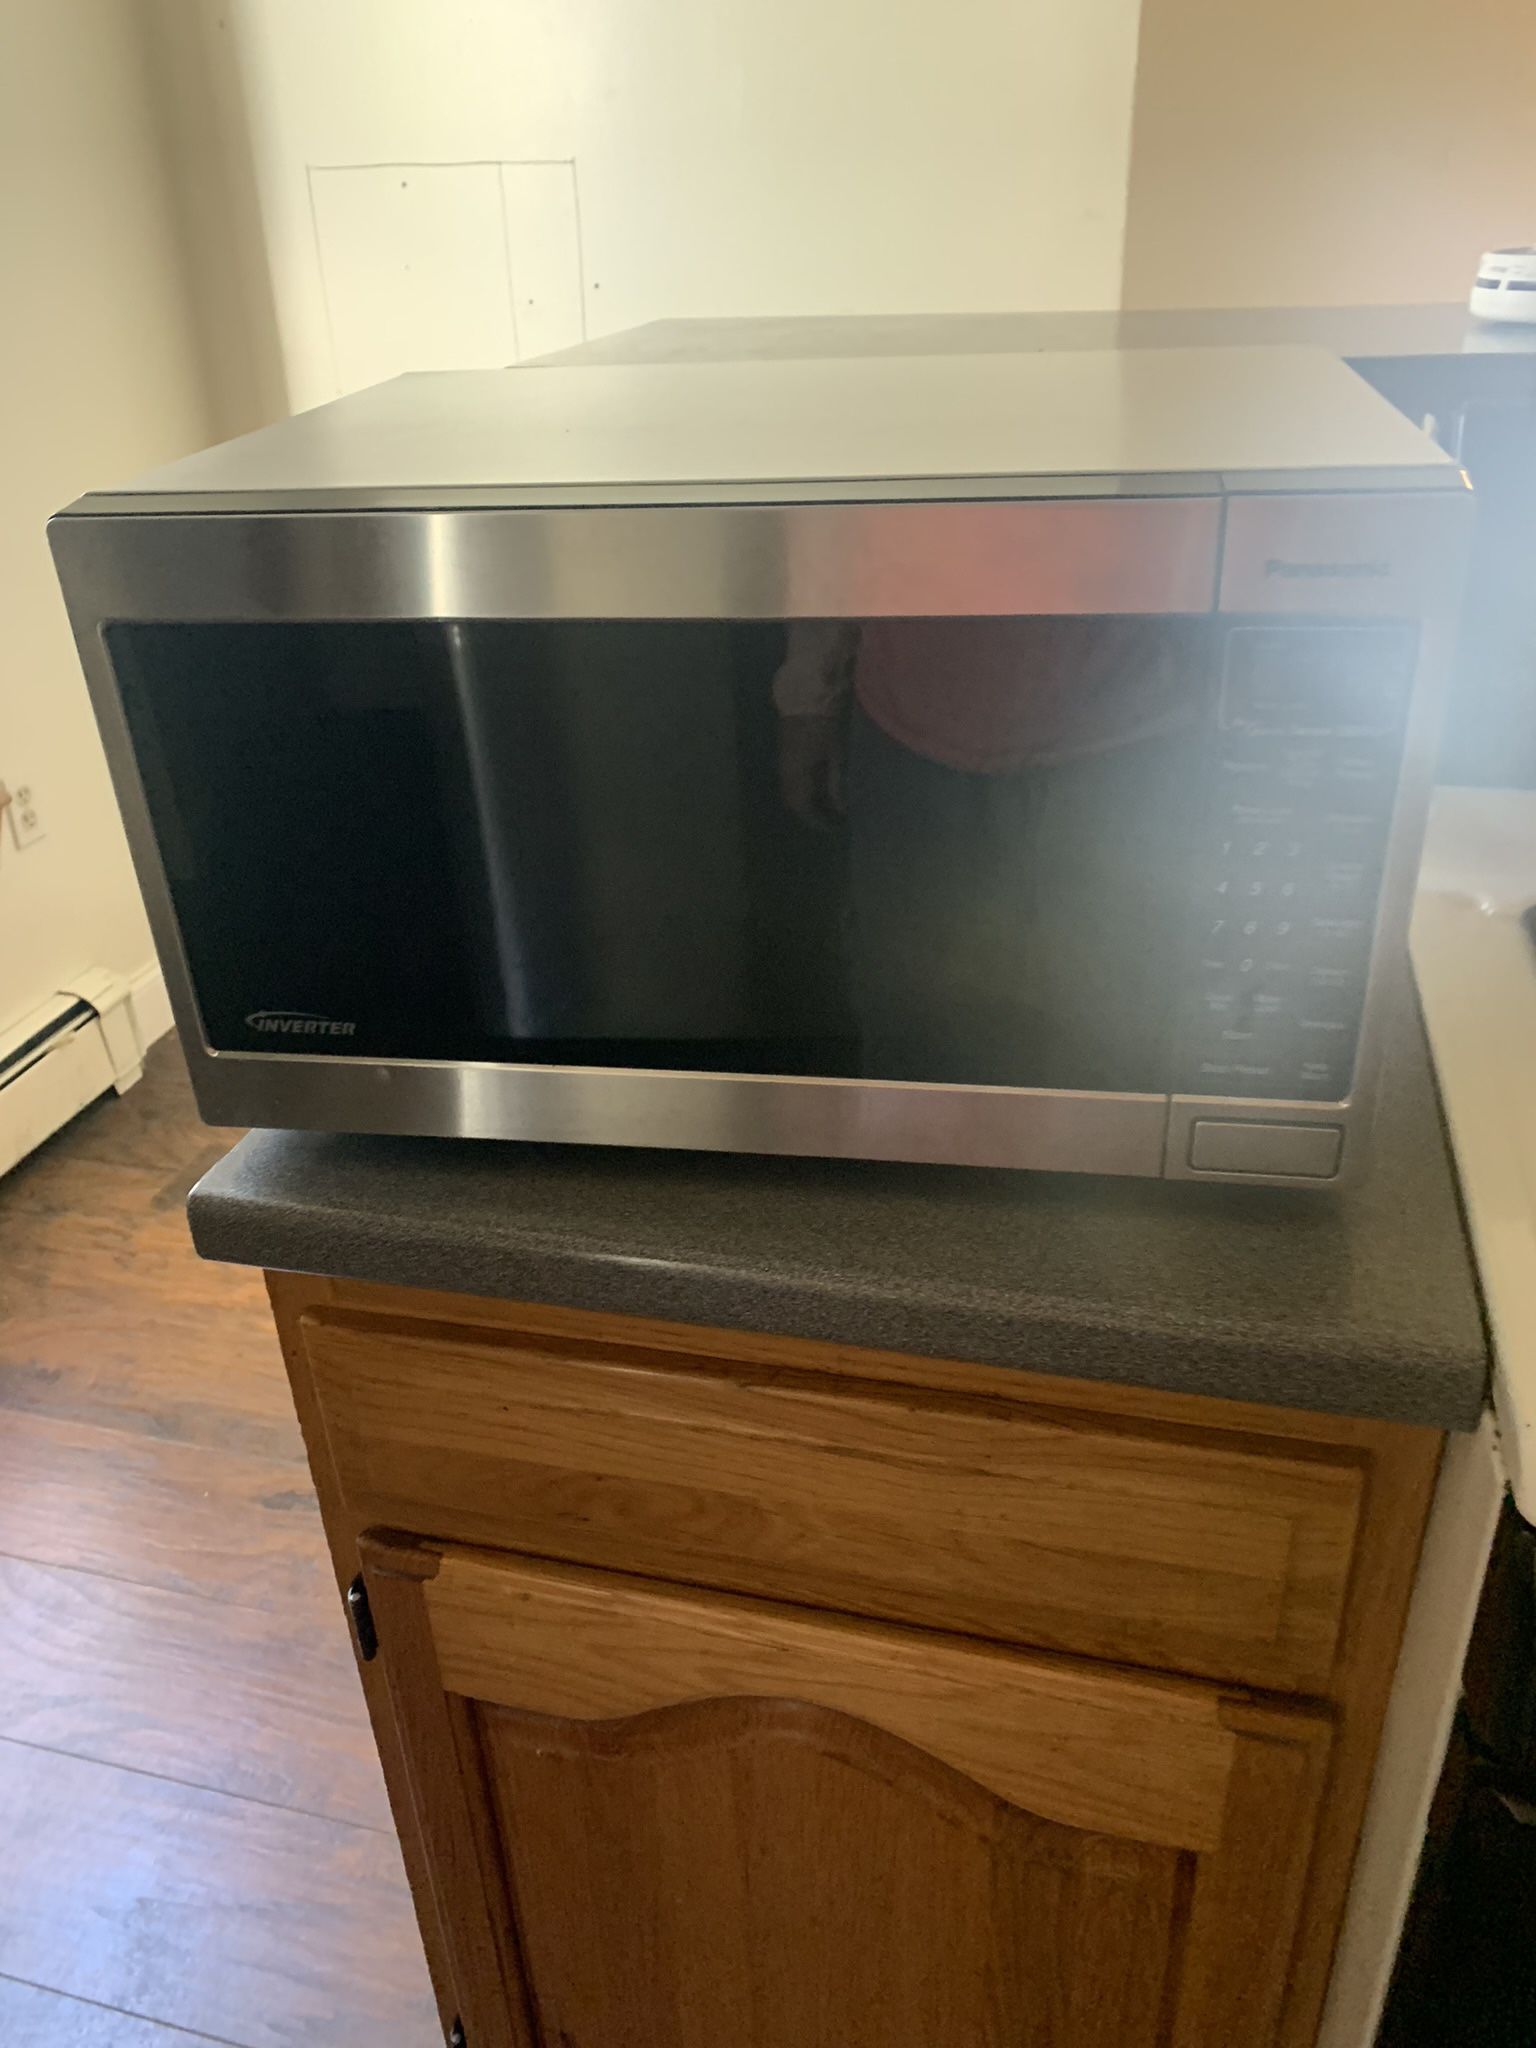 Moving/Selling Friday 11/11/22 (9 to 1) 